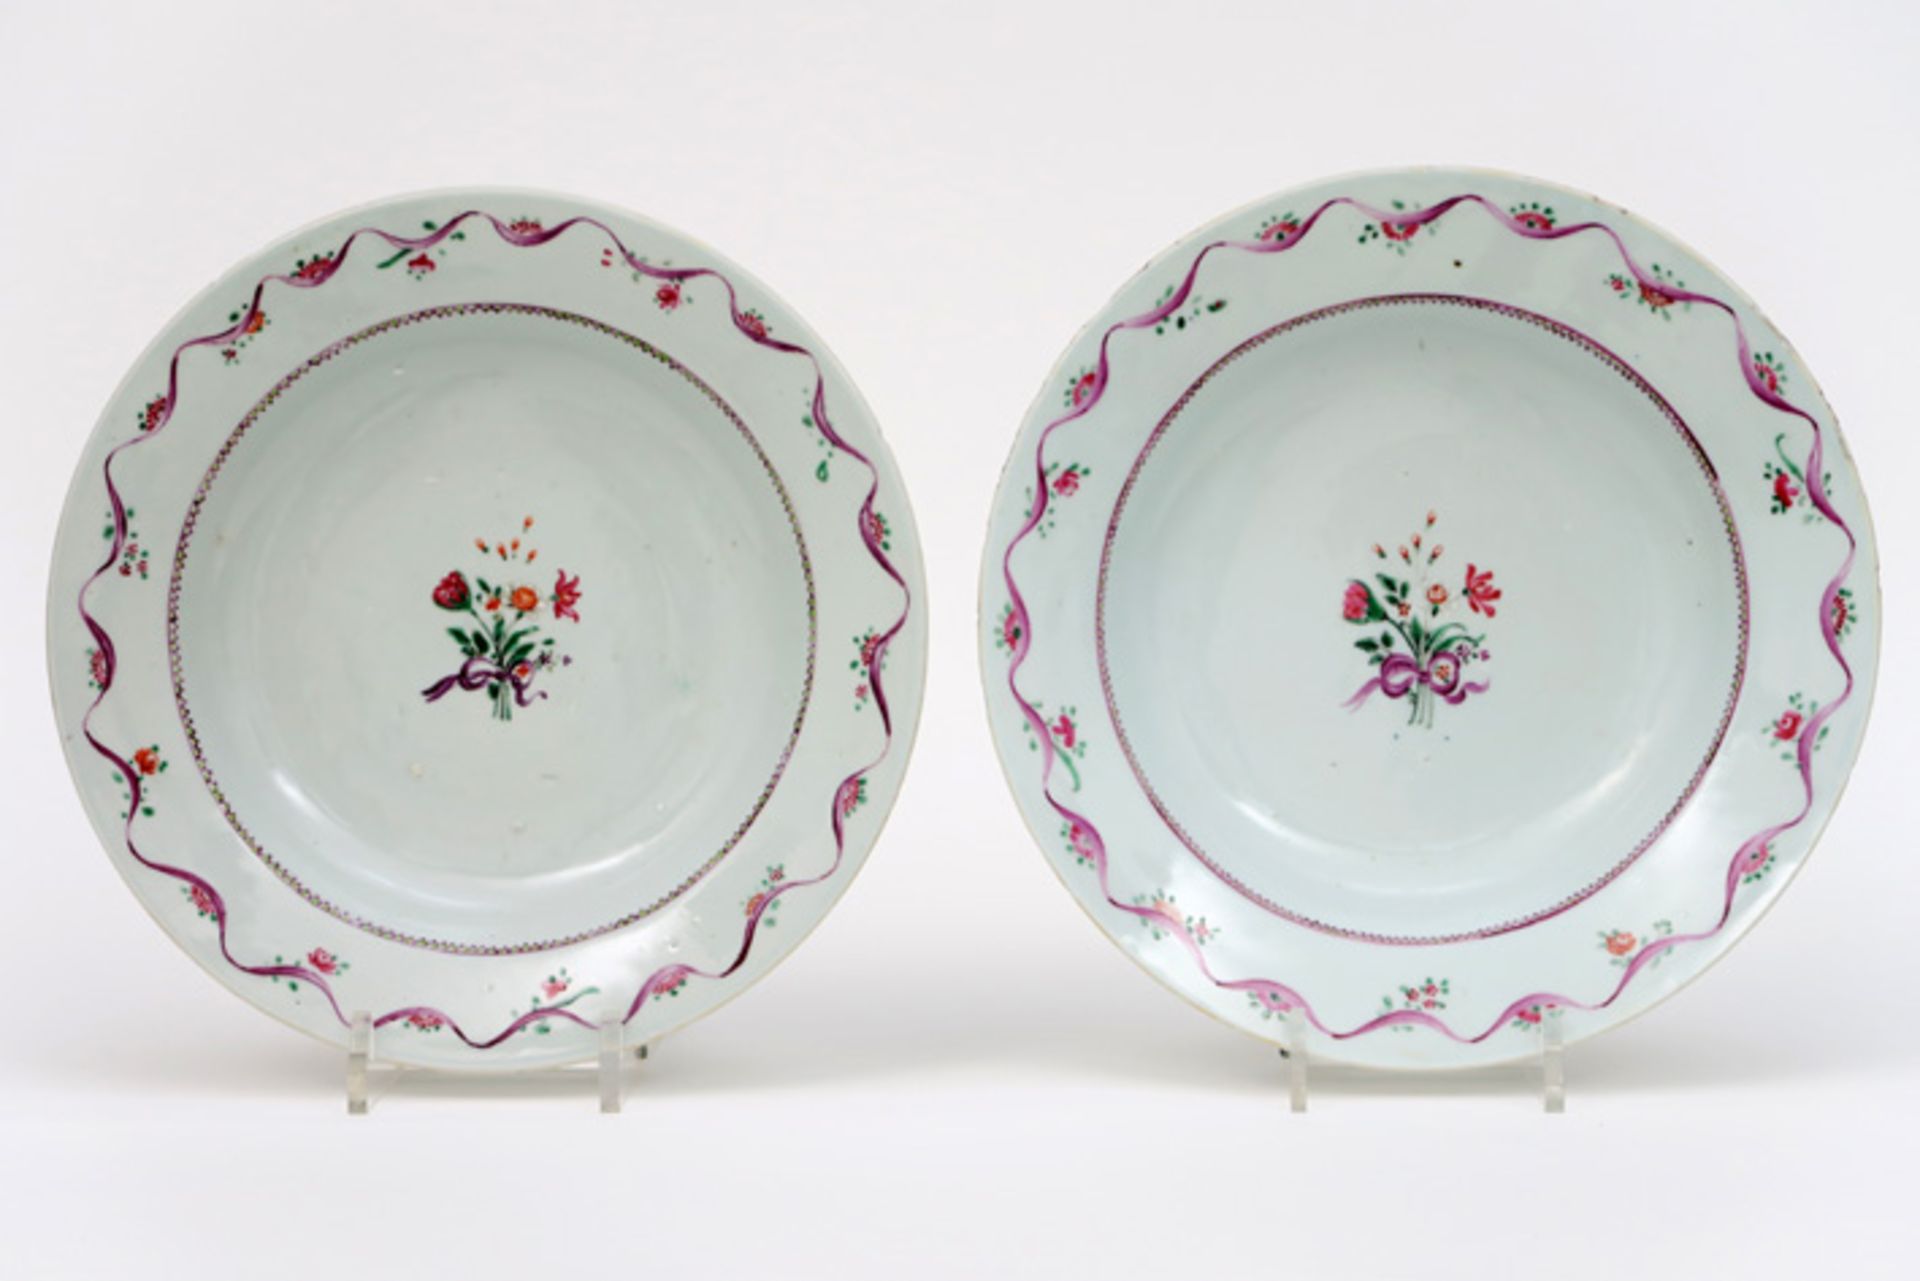 pair of 18th Cent. Chinese " Lowestoft " plates in porcelain with a polychrome decor||Paar achttiend